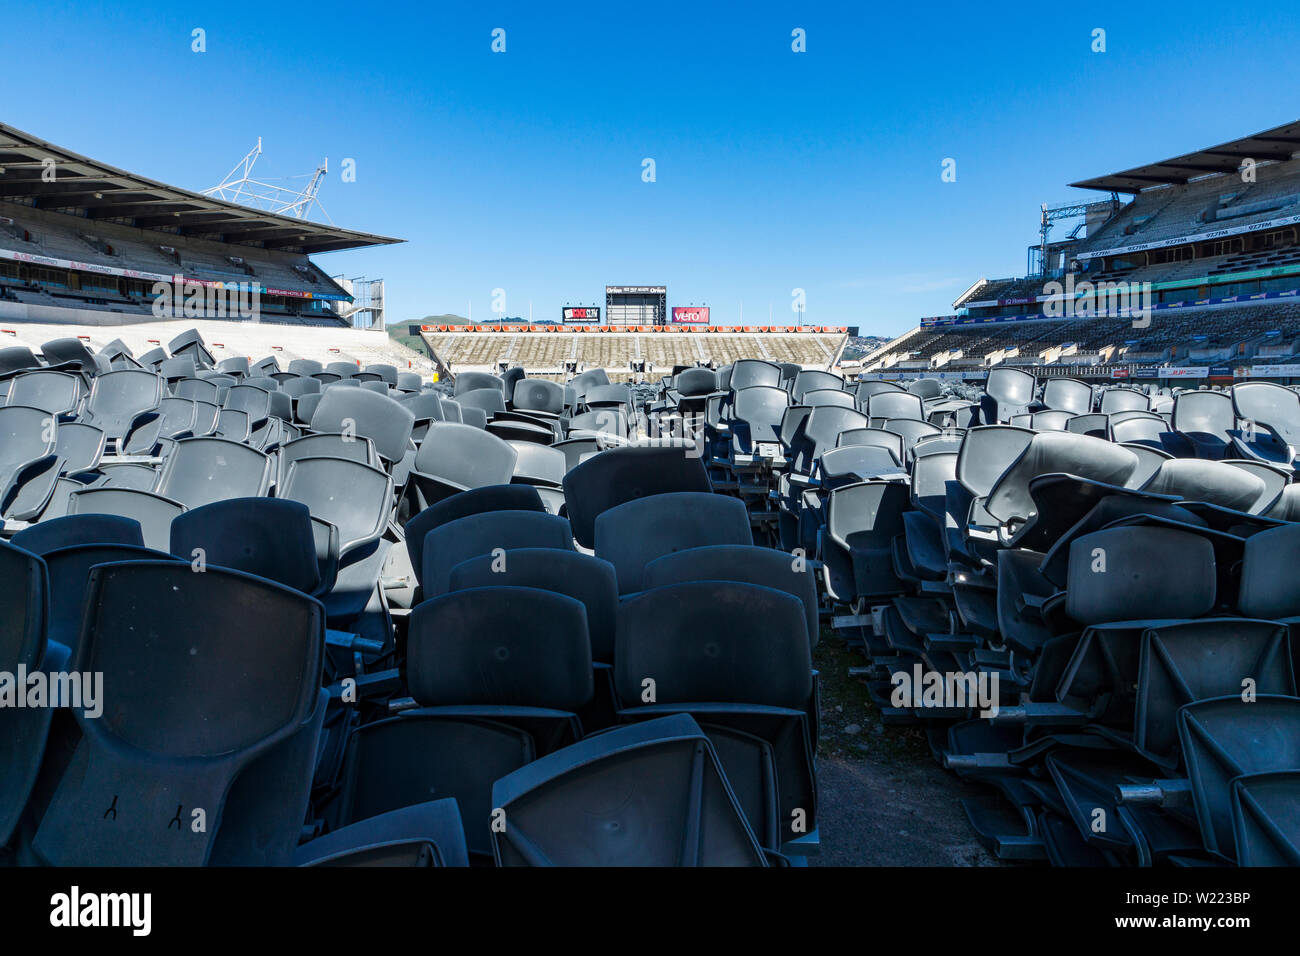 Lancaster Park stadium in Christchurch New Zealand before its demolition due to 2011 earthquake damage, showing detail of stacked seats. Stock Photo